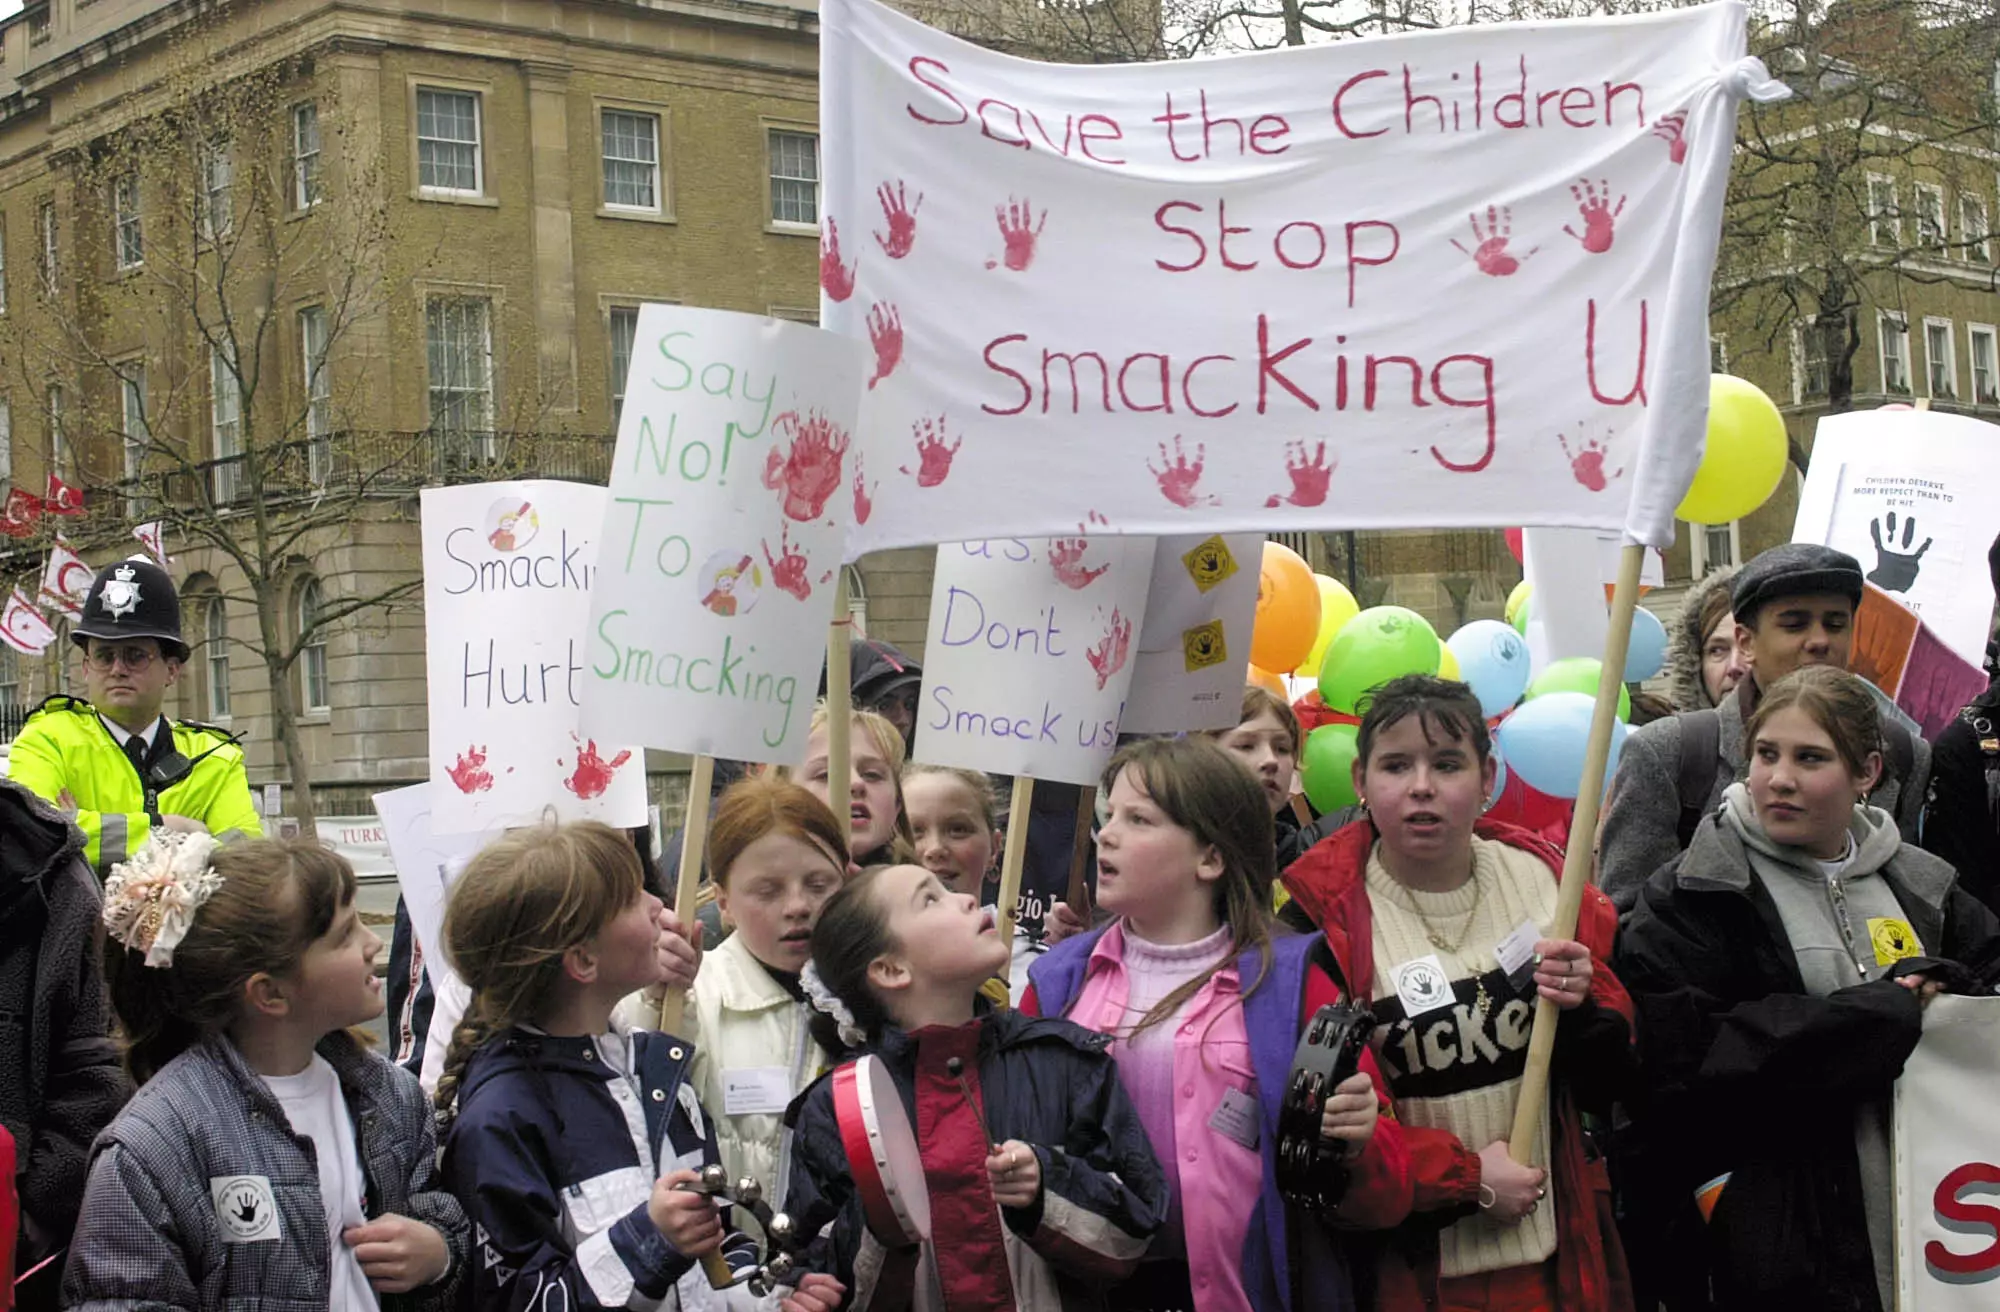 There have been campaigns to stop smacking across the UK for years (